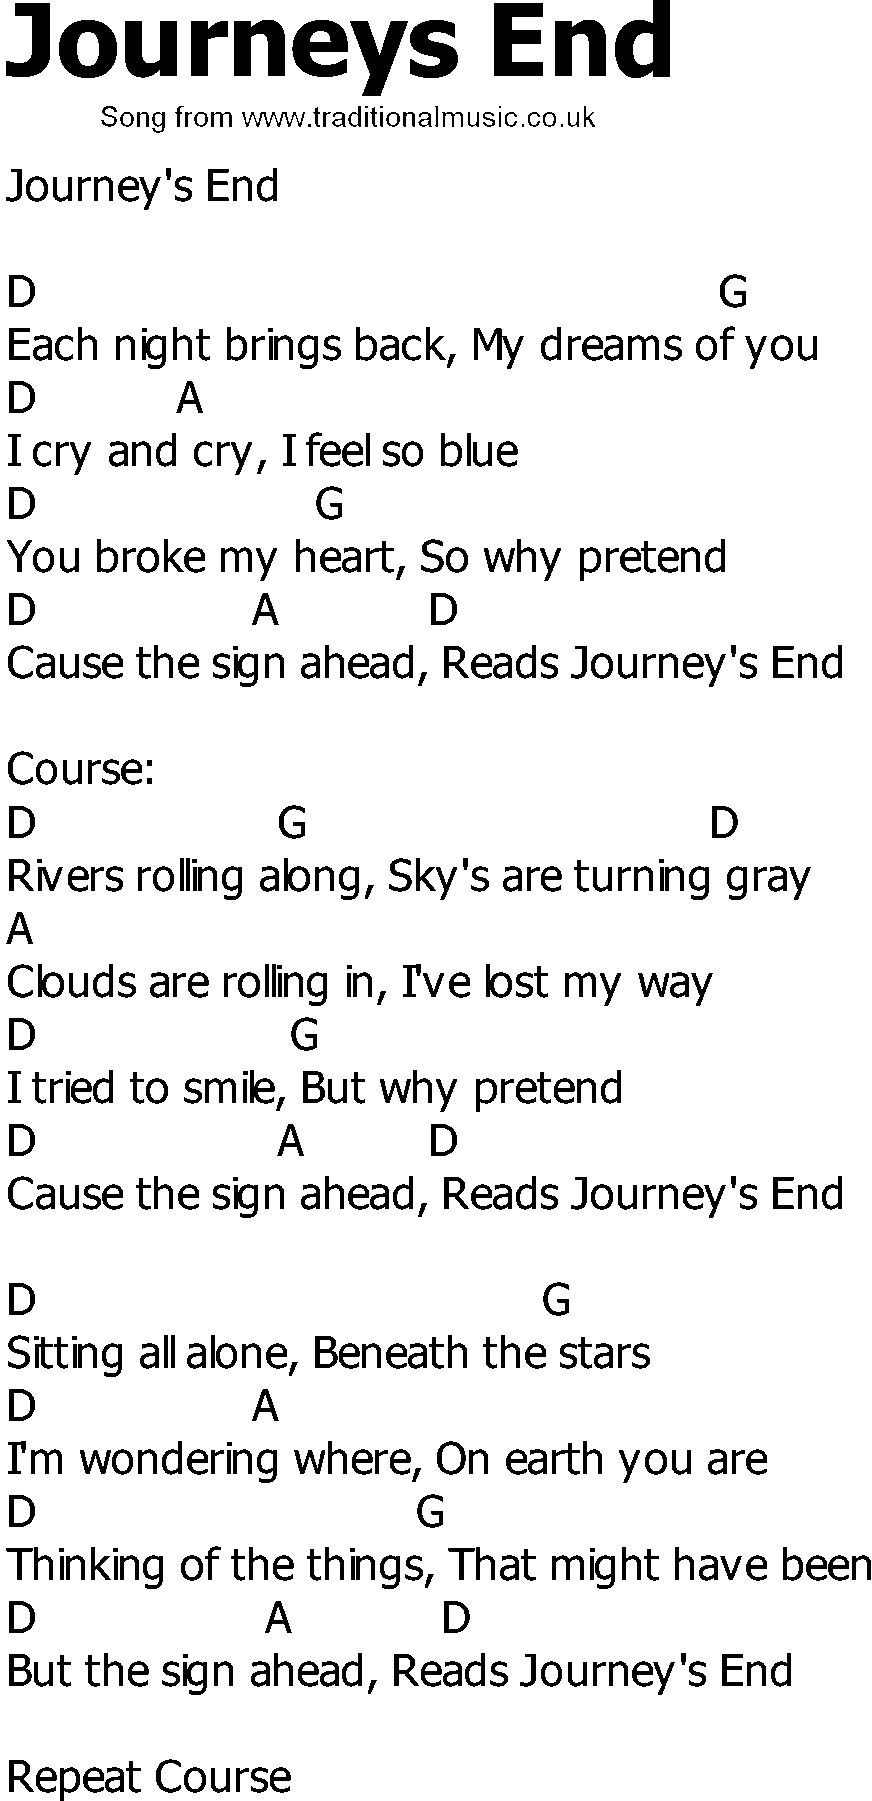 Old Country song lyrics with chords - Journeys End